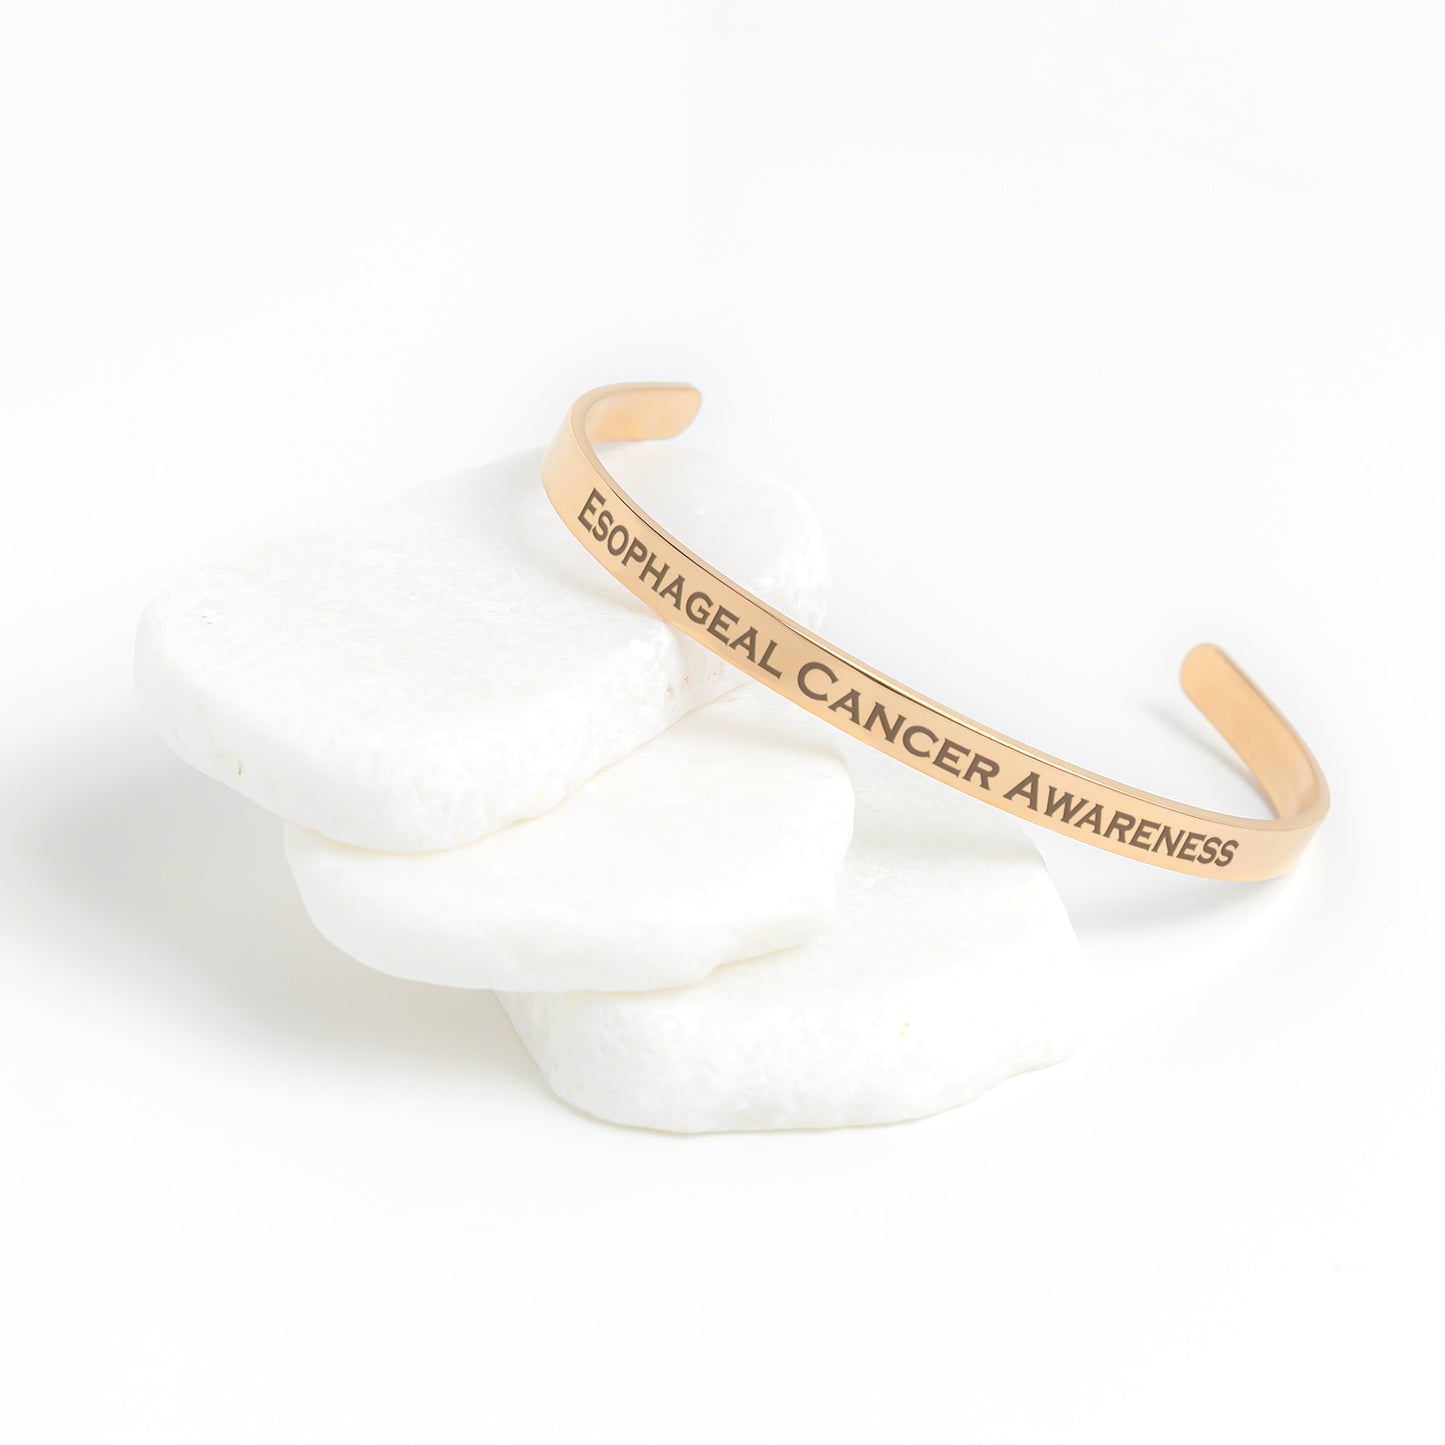 Personalized Esophageal Cancer Awareness Cuff Bracelet